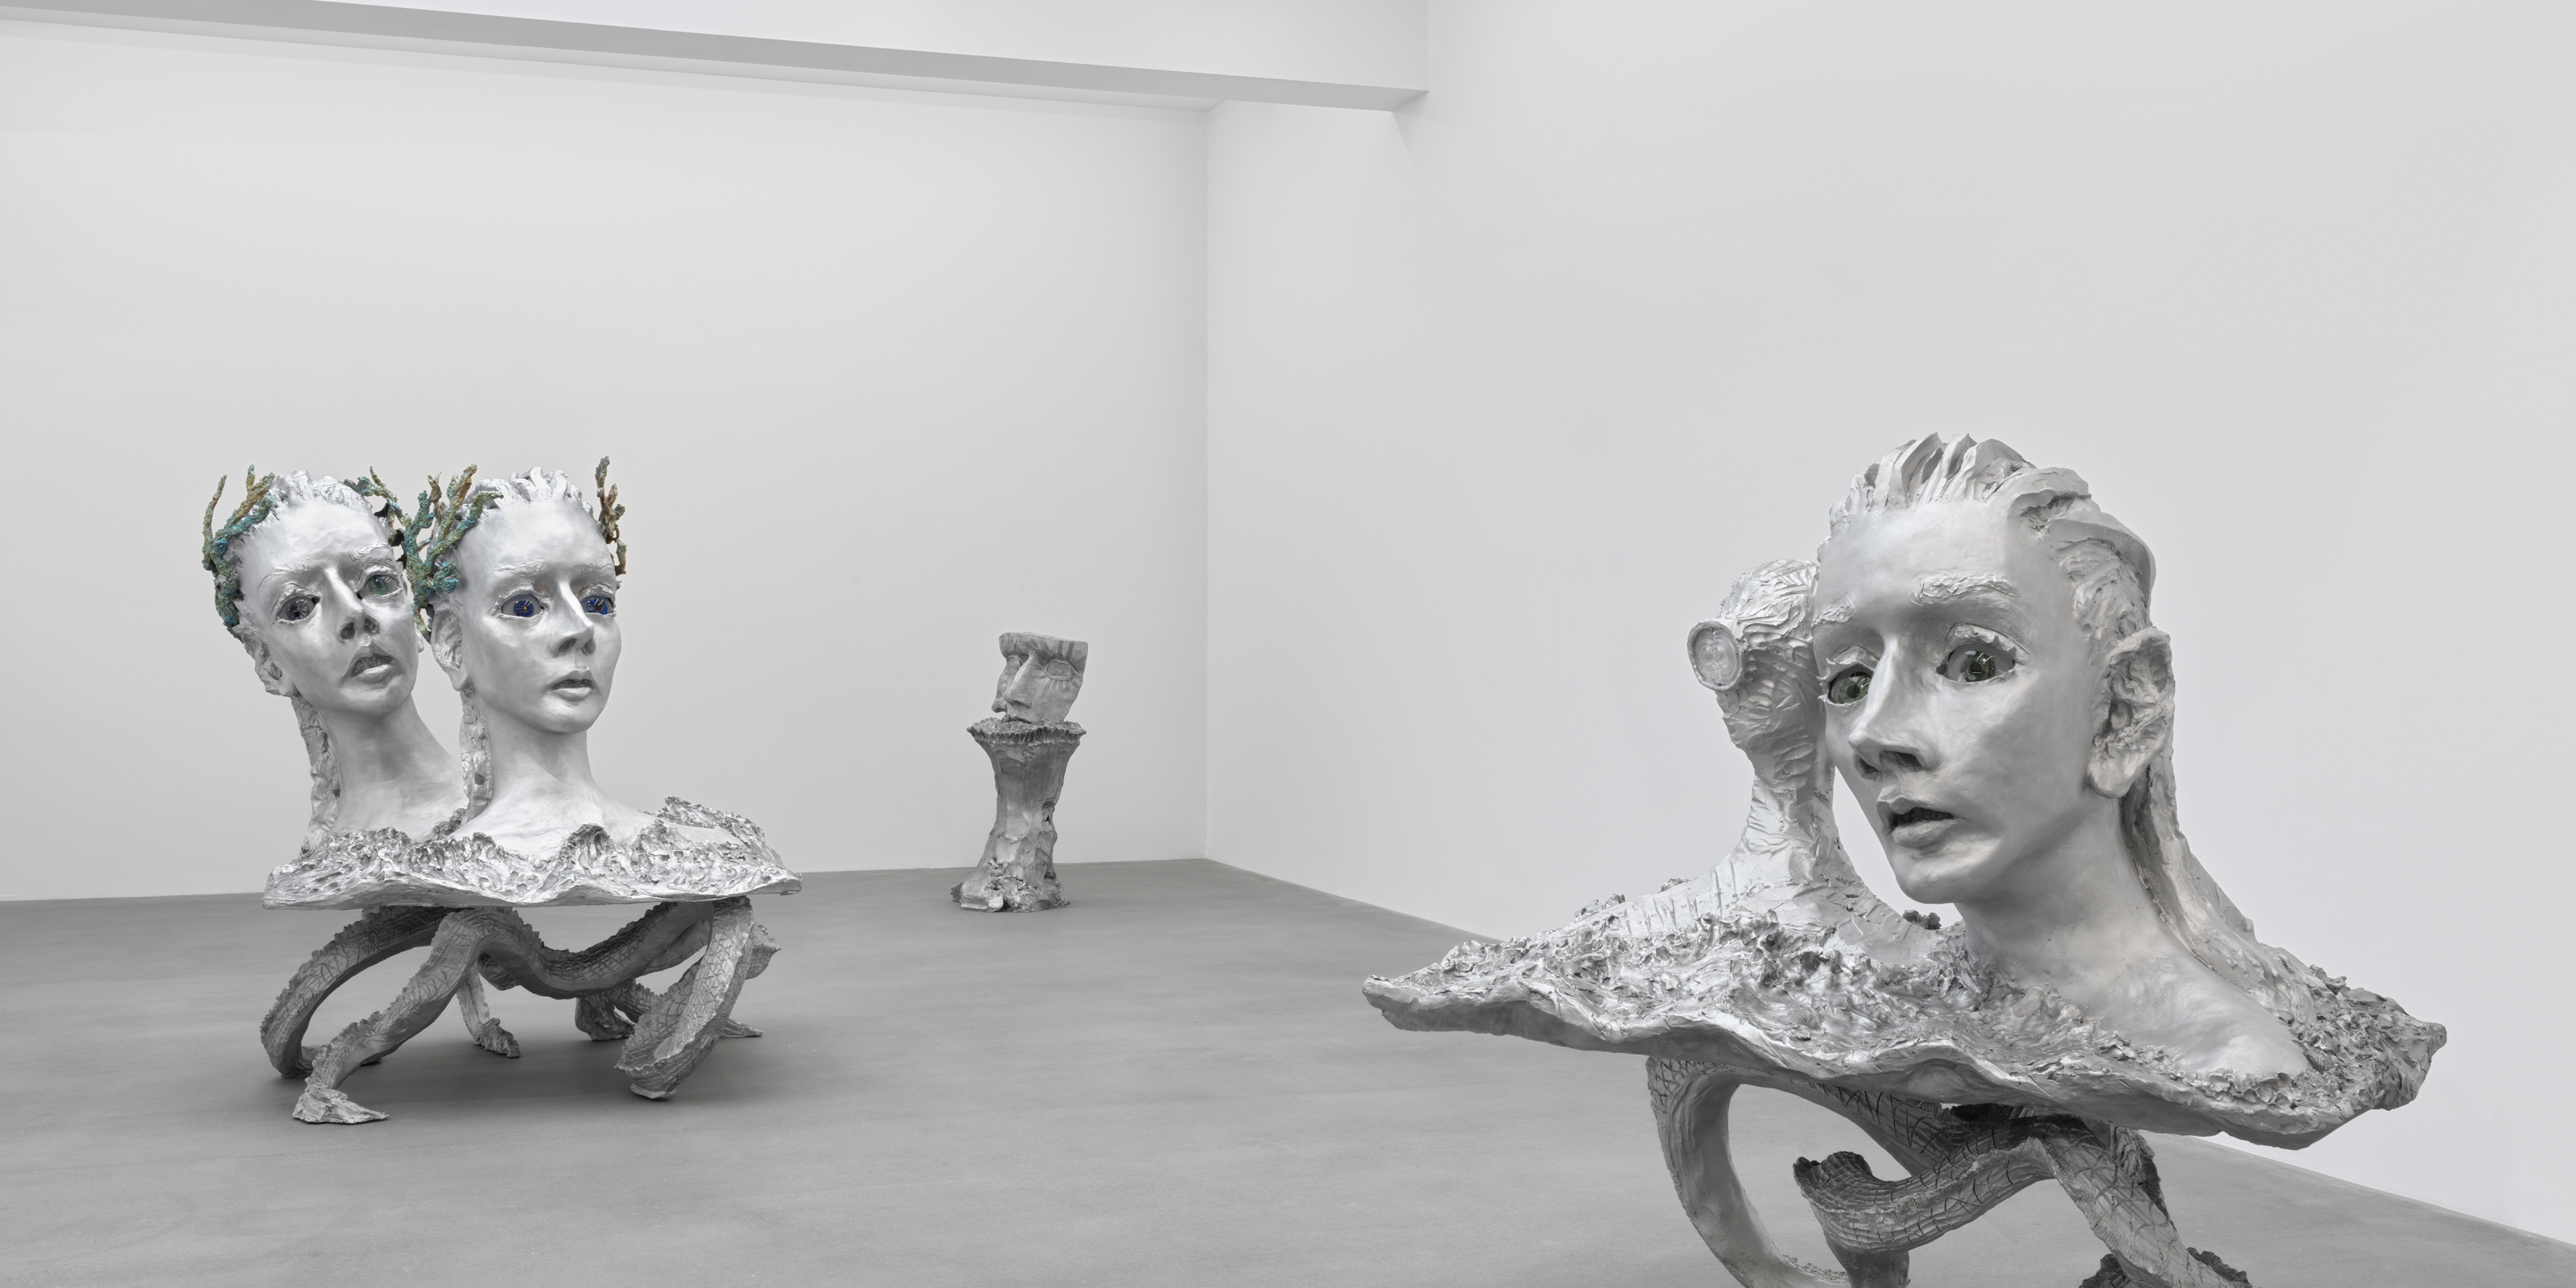 Installation view of sculptures by Jean-Marie Appriou